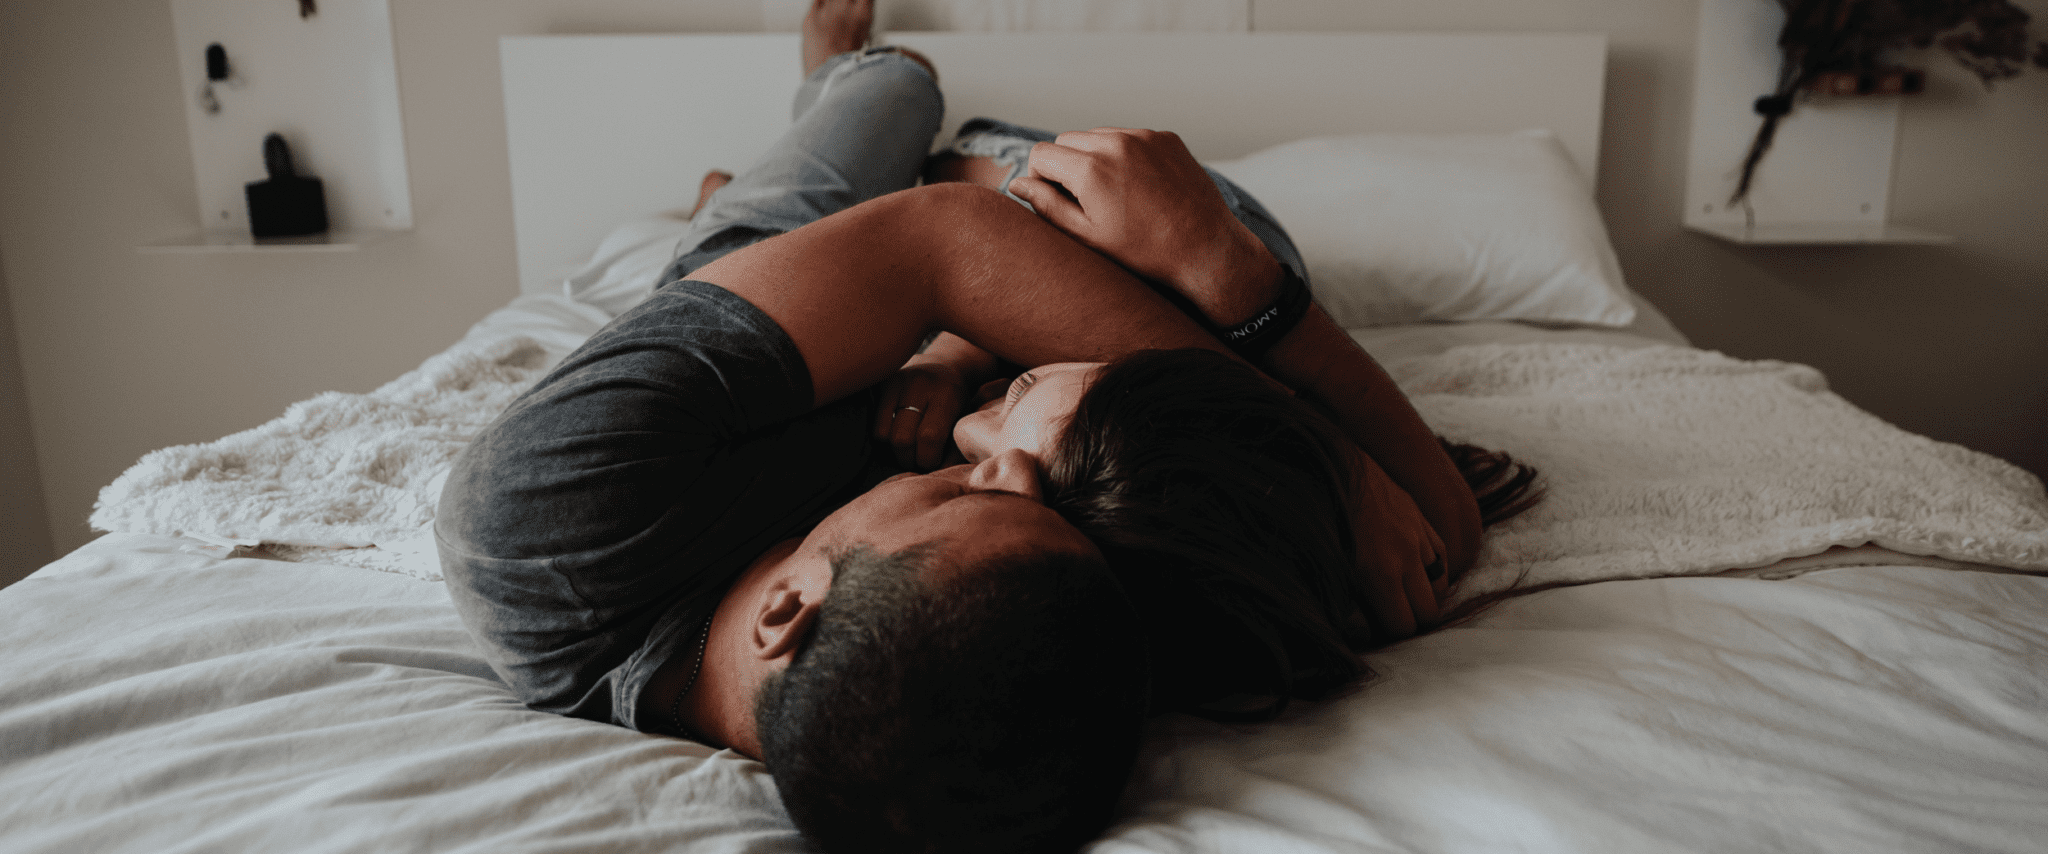 sex hints for married couples